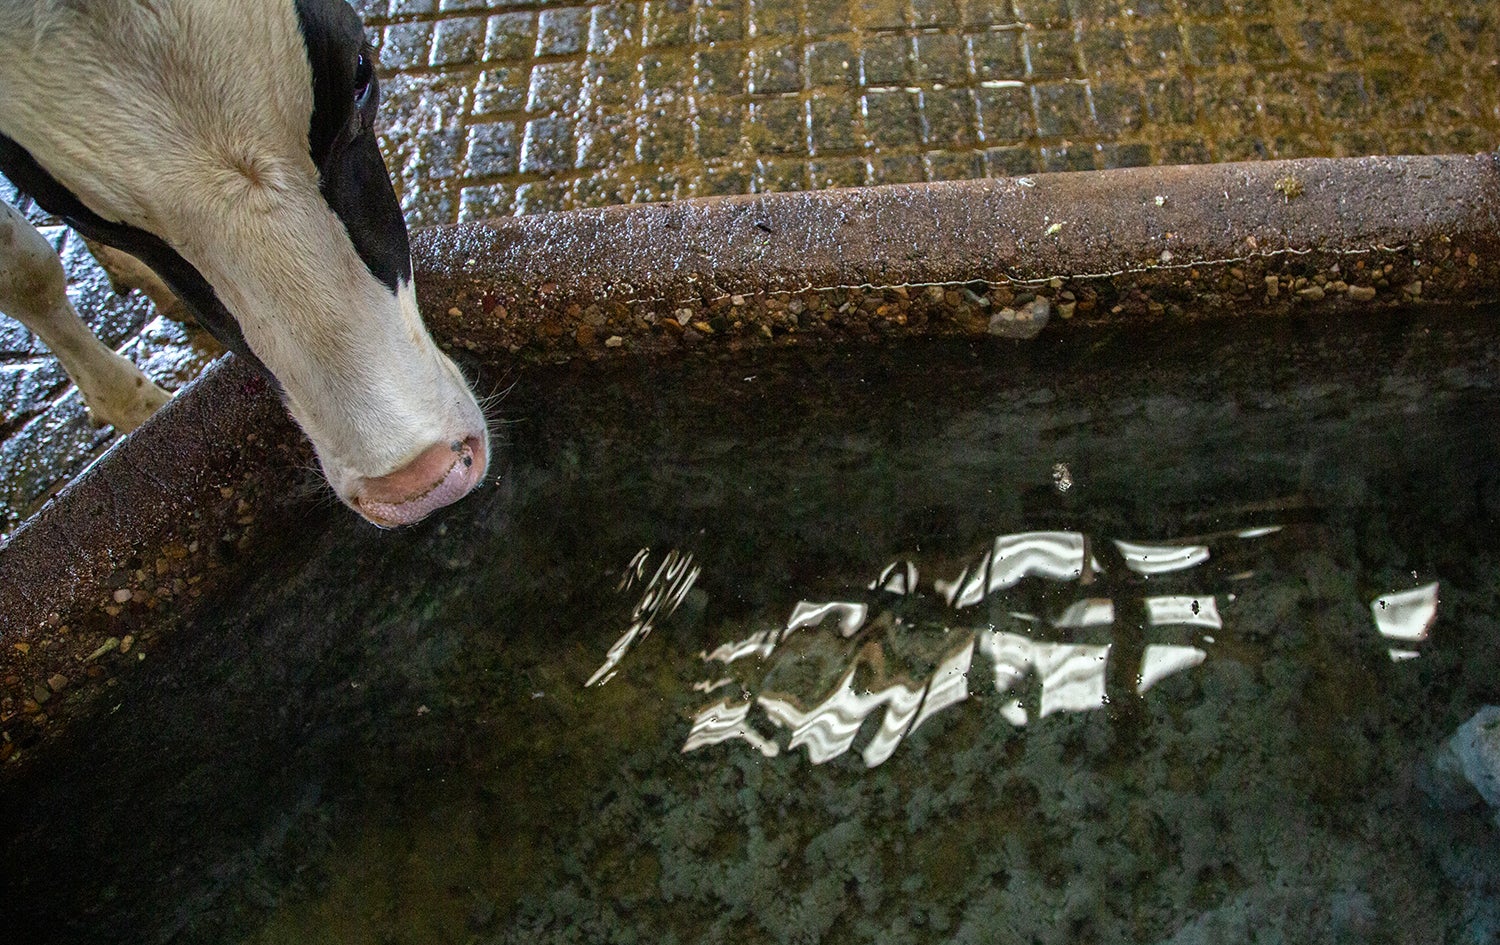 Cow drinking water from a trough